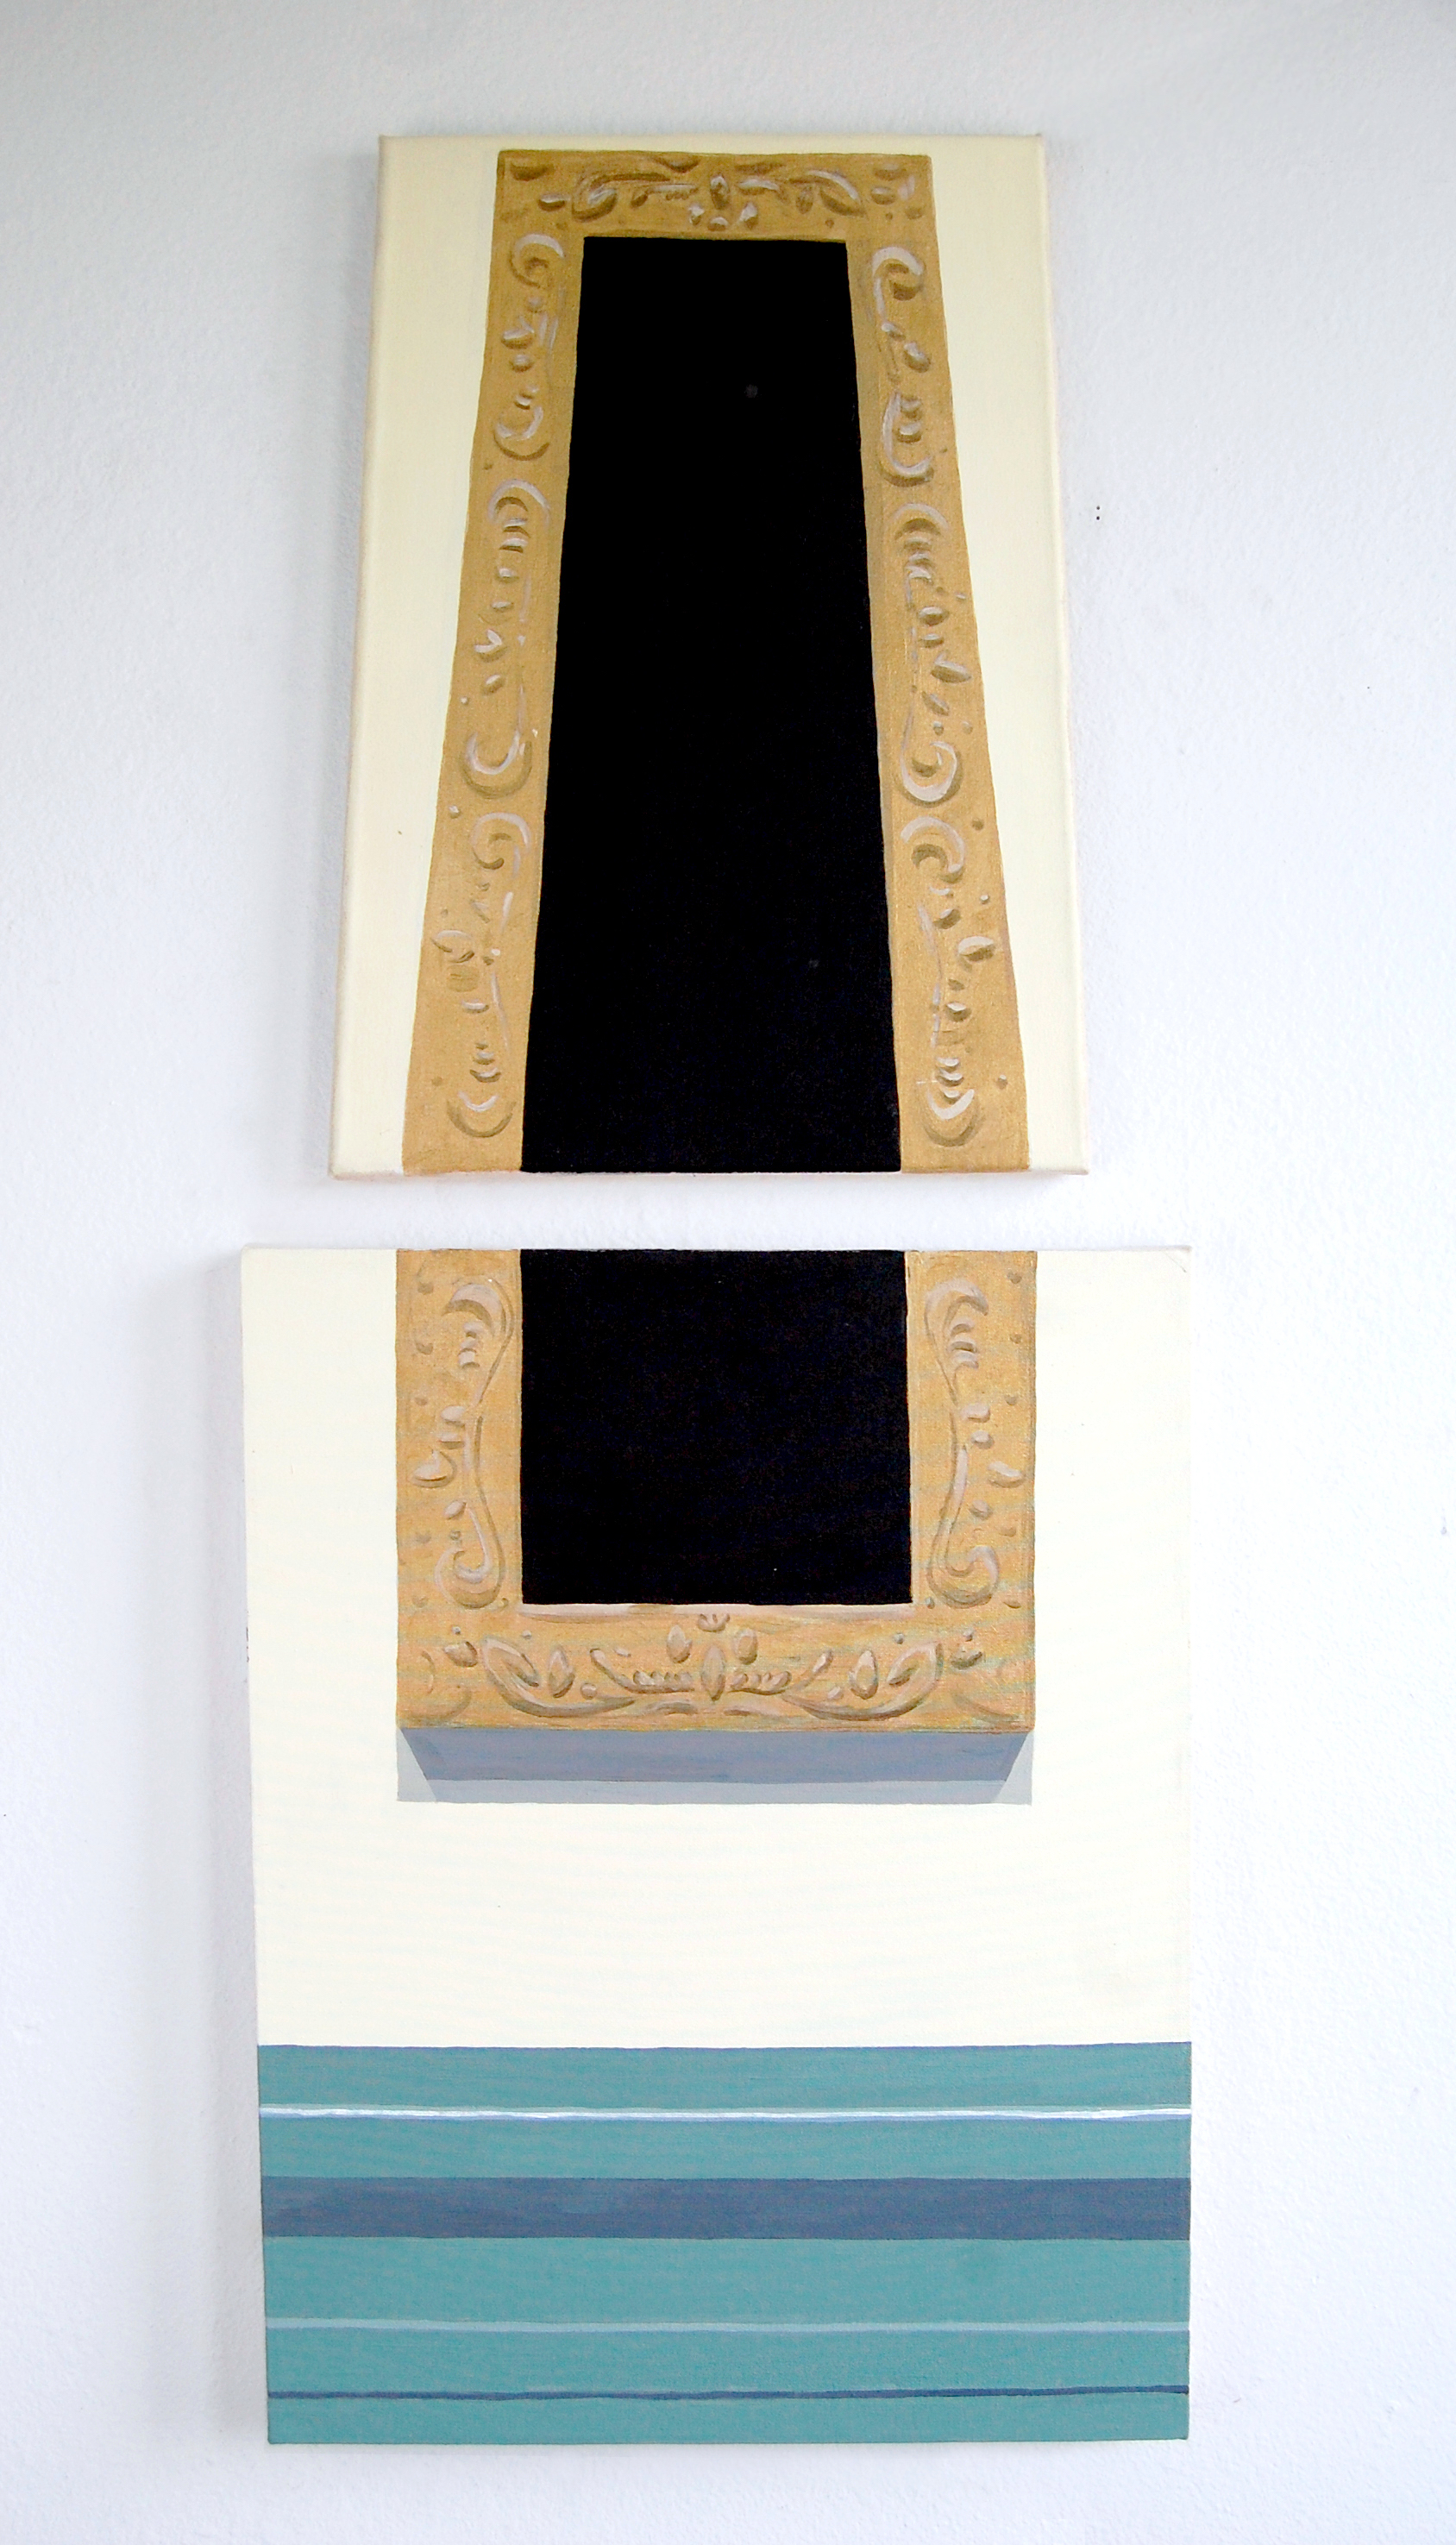 Two canvas stacked on top of each other. 
            The top canvas is distorted so that the top is narrower than the bottom. The image depicted is an ornate museum frame 
            hanging on a wall.